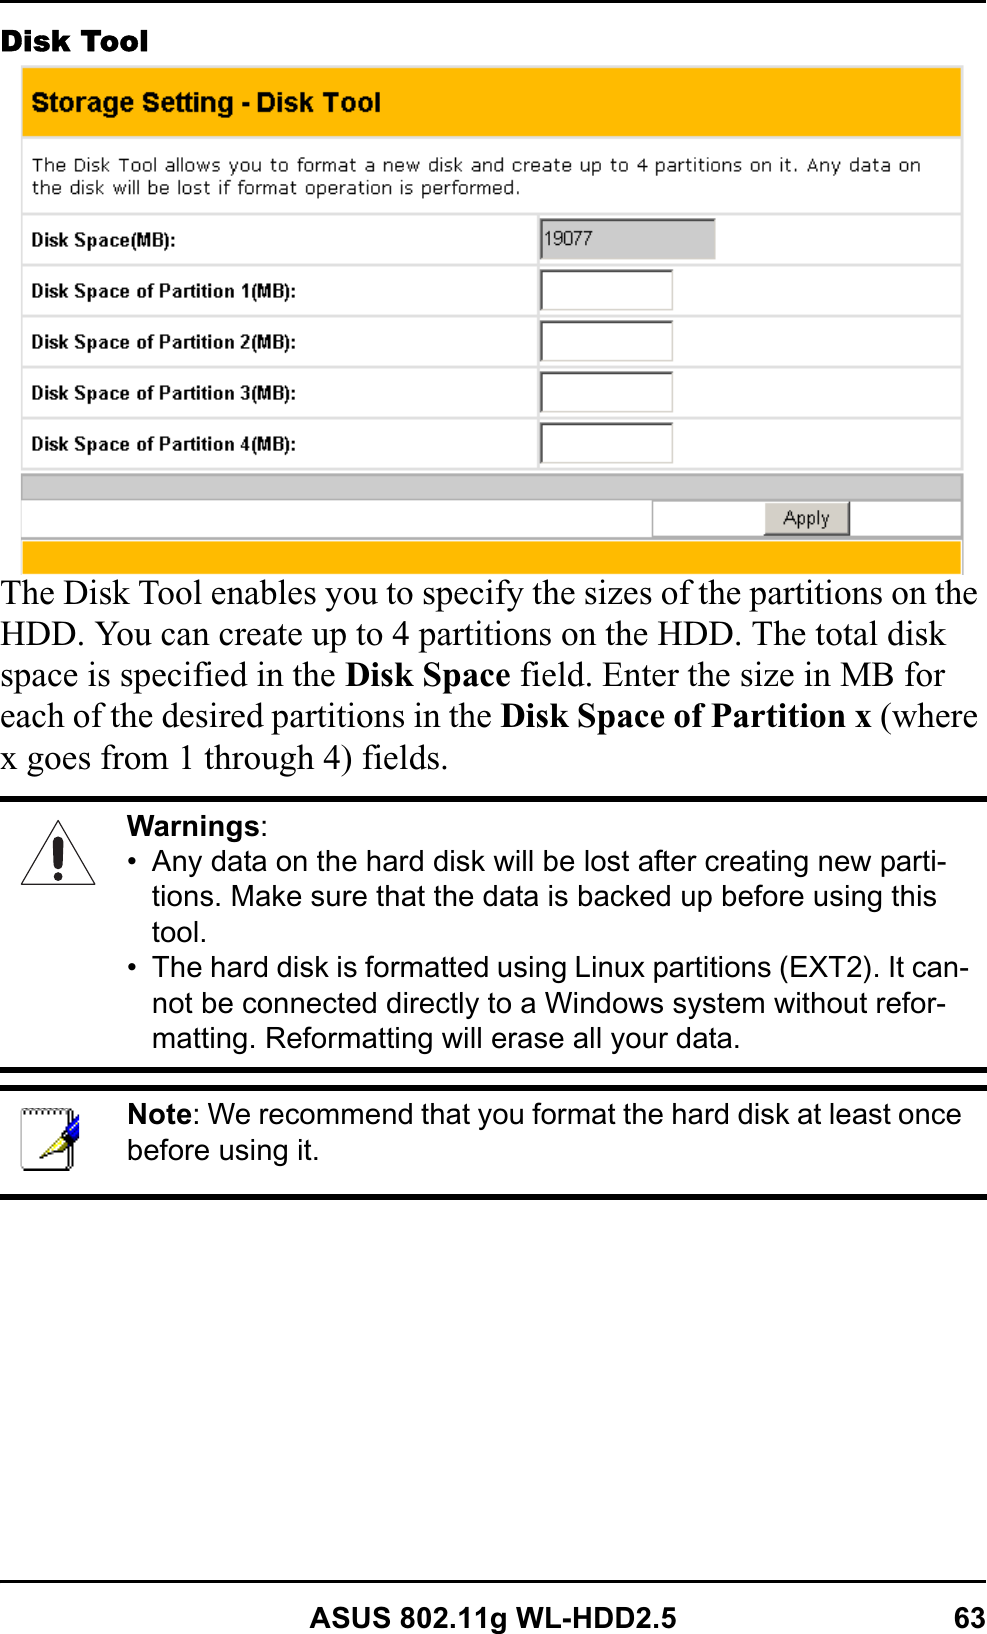 ASUS 802.11g WL-HDD2.5 63Disk ToolThe Disk Tool enables you to specify the sizes of the partitions on the HDD. You can create up to 4 partitions on the HDD. The total disk space is specified in the Disk Space field. Enter the size in MB for each of the desired partitions in the Disk Space of Partition x (where x goes from 1 through 4) fields.Warnings:• Any data on the hard disk will be lost after creating new parti-tions. Make sure that the data is backed up before using this tool.• The hard disk is formatted using Linux partitions (EXT2). It can-not be connected directly to a Windows system without refor-matting. Reformatting will erase all your data.Note: We recommend that you format the hard disk at least once before using it. 